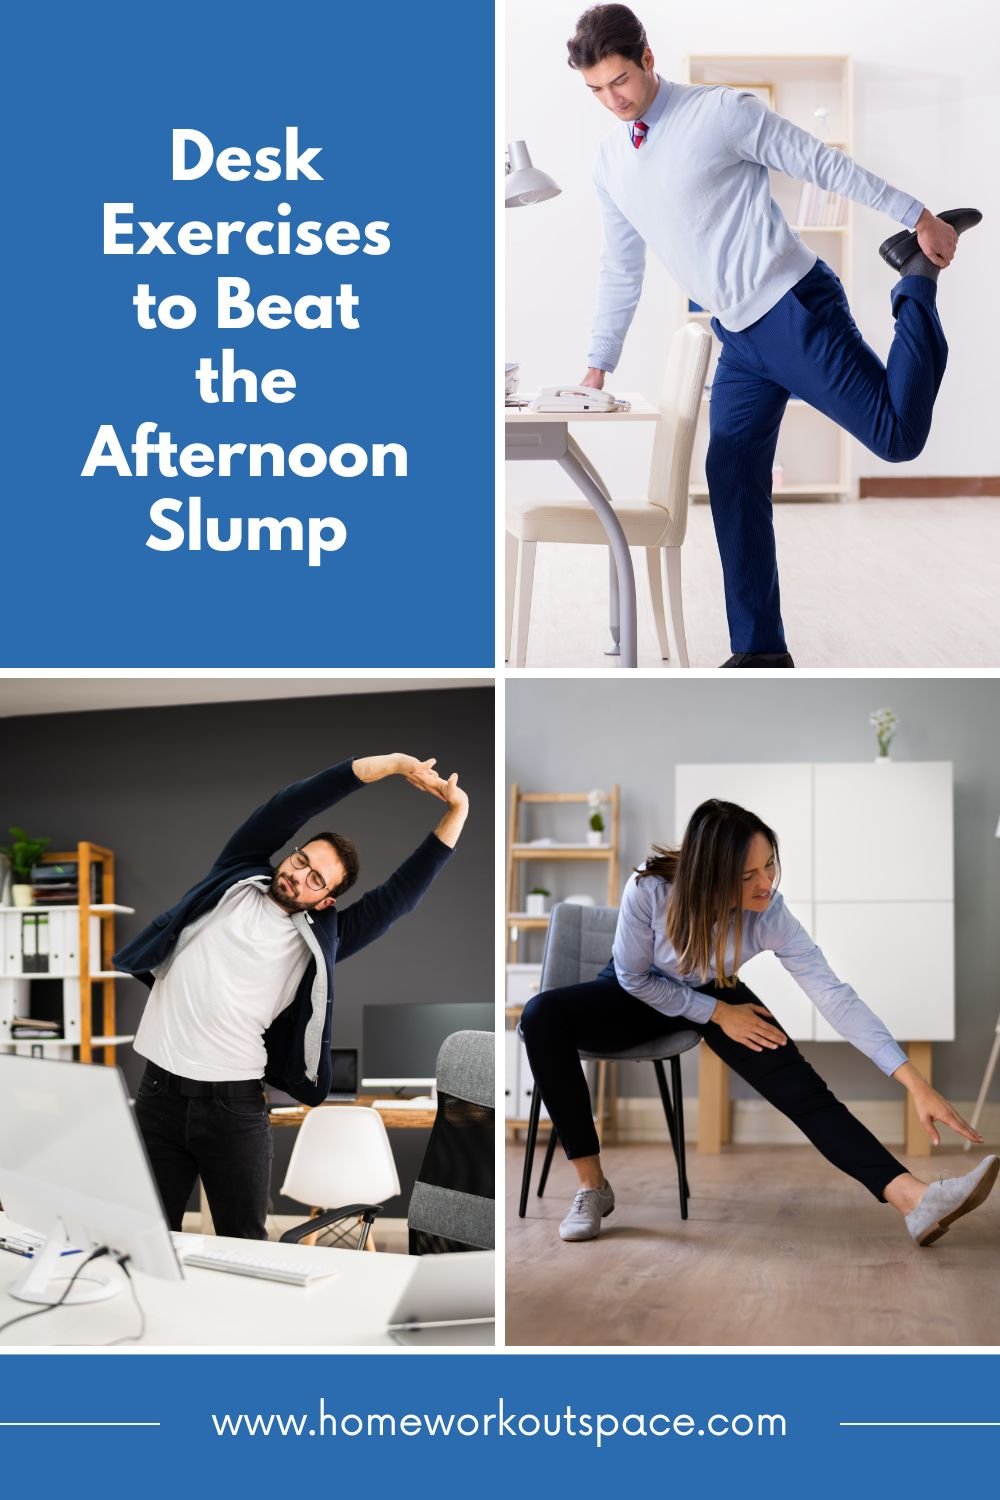 Desk Exercises to Beat the Afternoon Slump